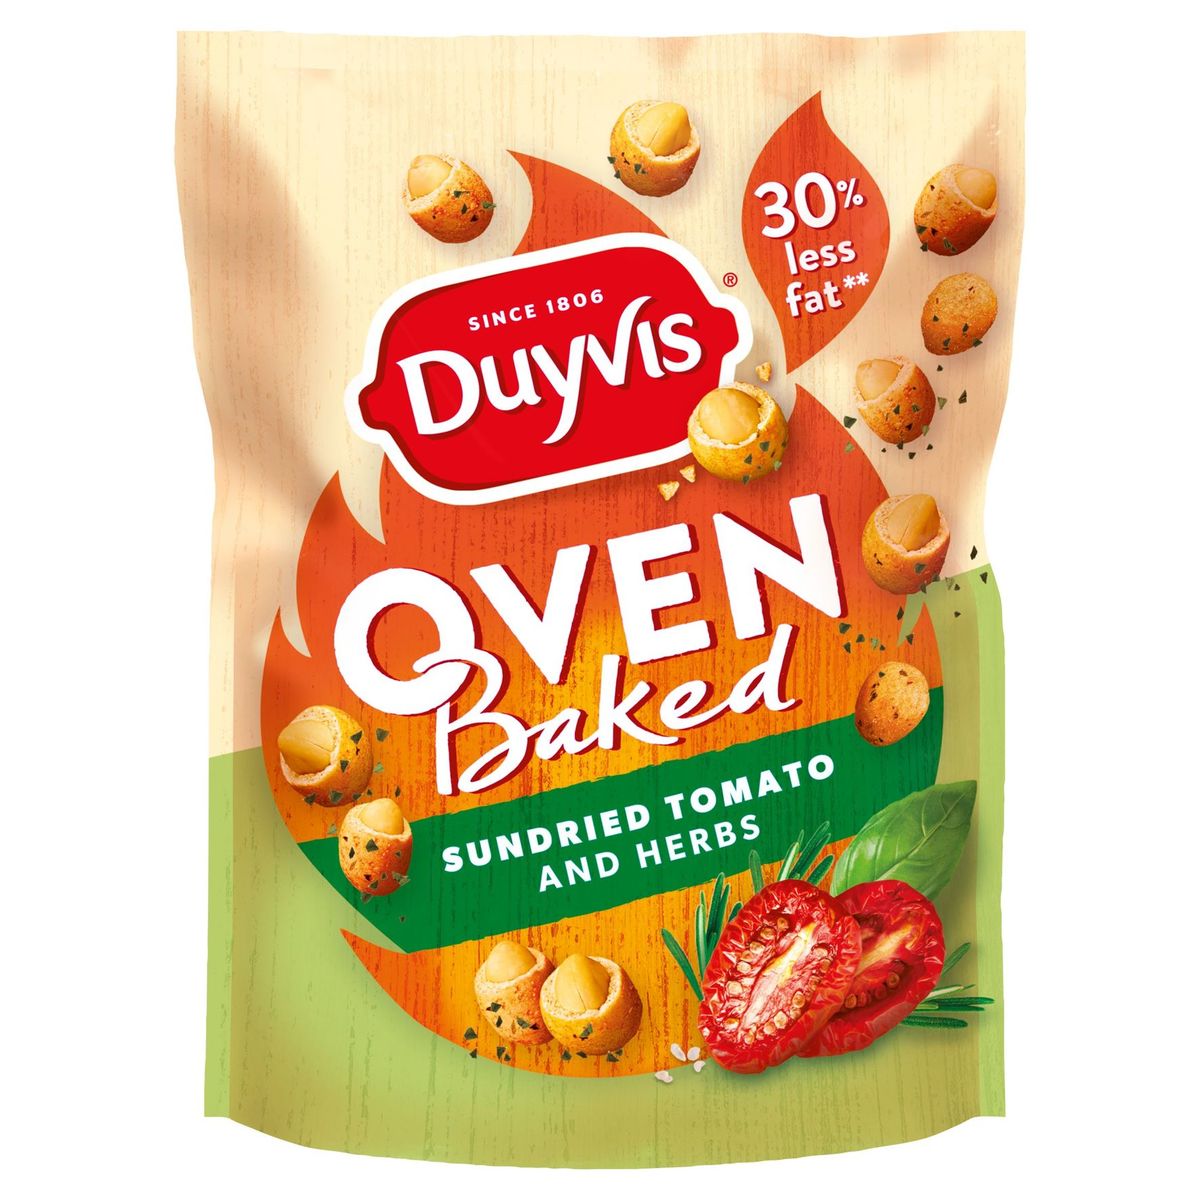 Duyvis Oven Baked Nootjes Sundried Tomato And Herbs 175 gr